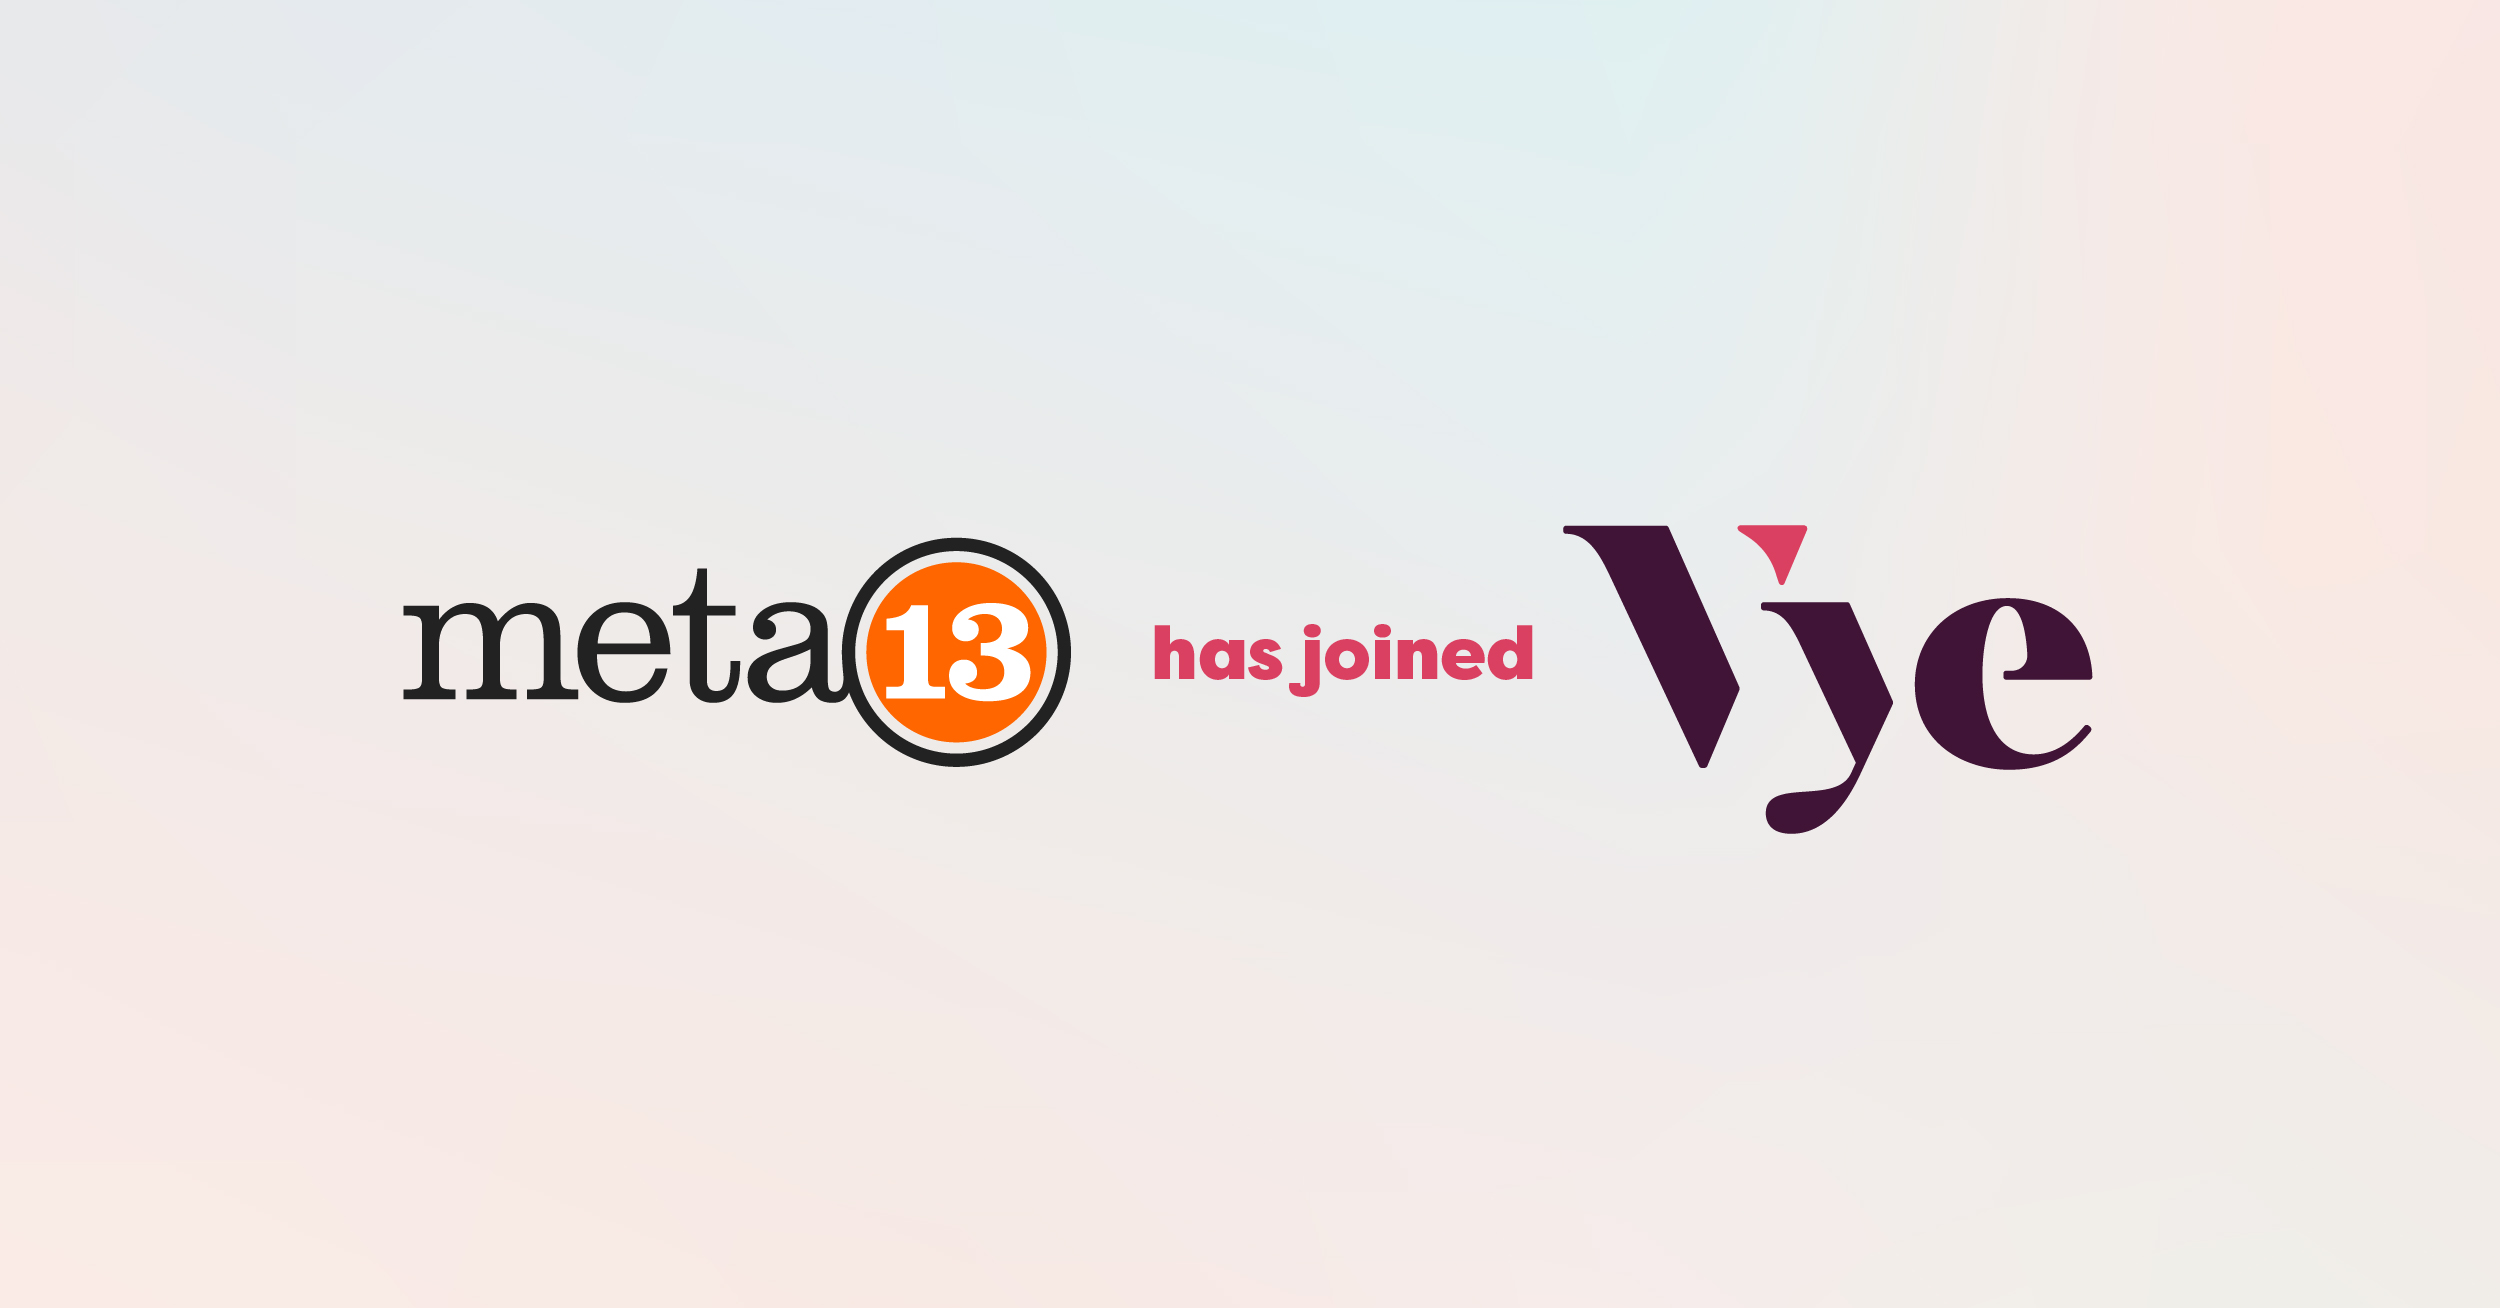 Two Leading Agencies — Vye and Meta 13 — Become Stronger Together